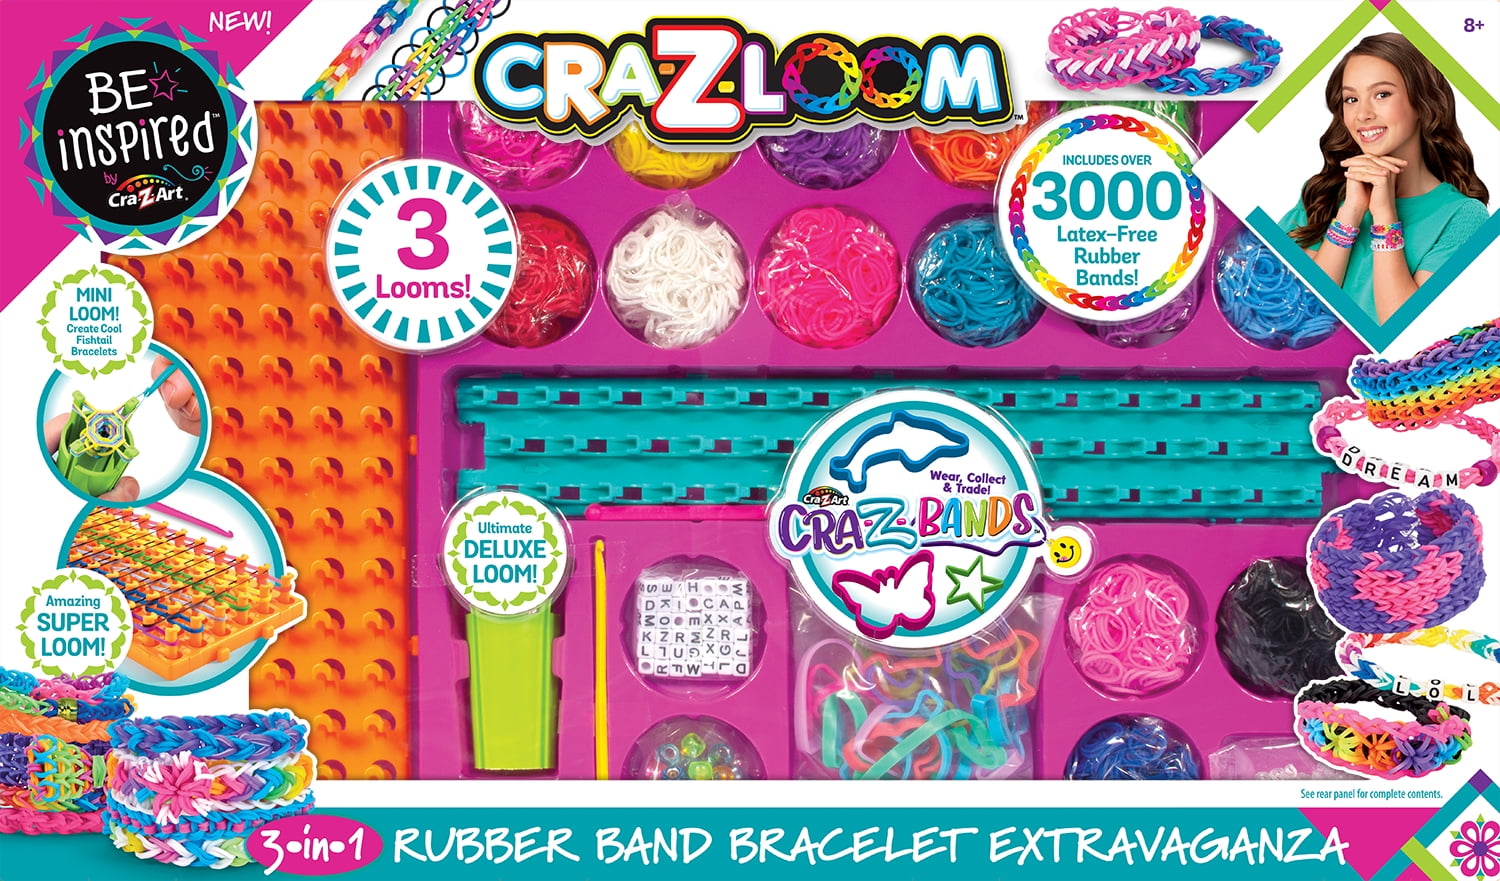 Krazy Looms 3000 Bands Box set Bracelets Kit Includes Erasers and Accessories Box of Three Floors